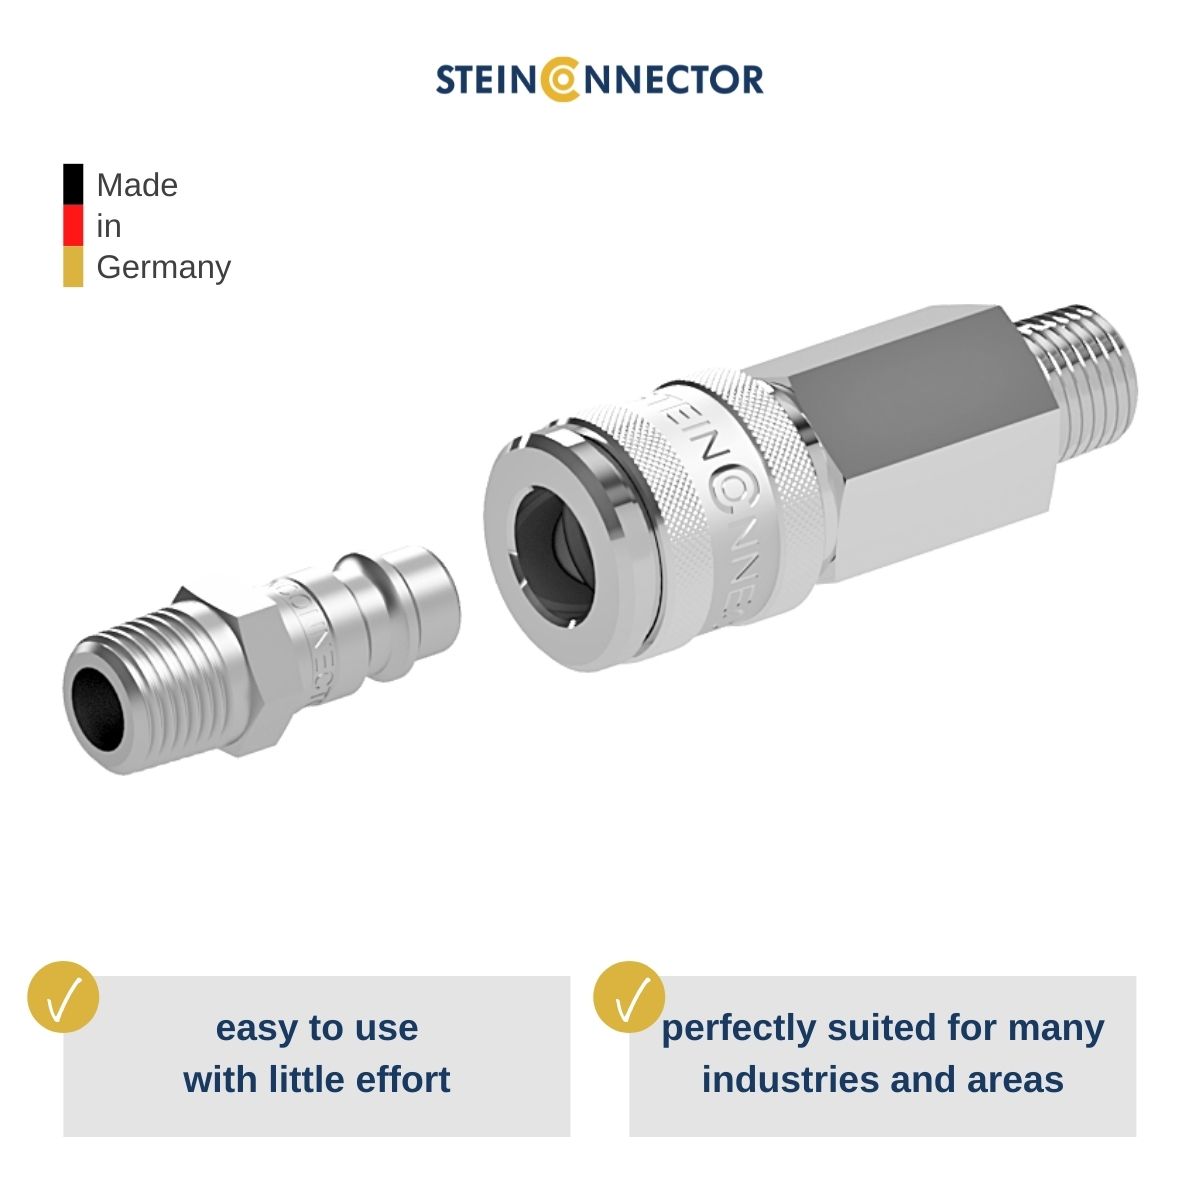 steinconnector compressed air plug socket quick coupling pneumatic & compressed air accessories made in germany